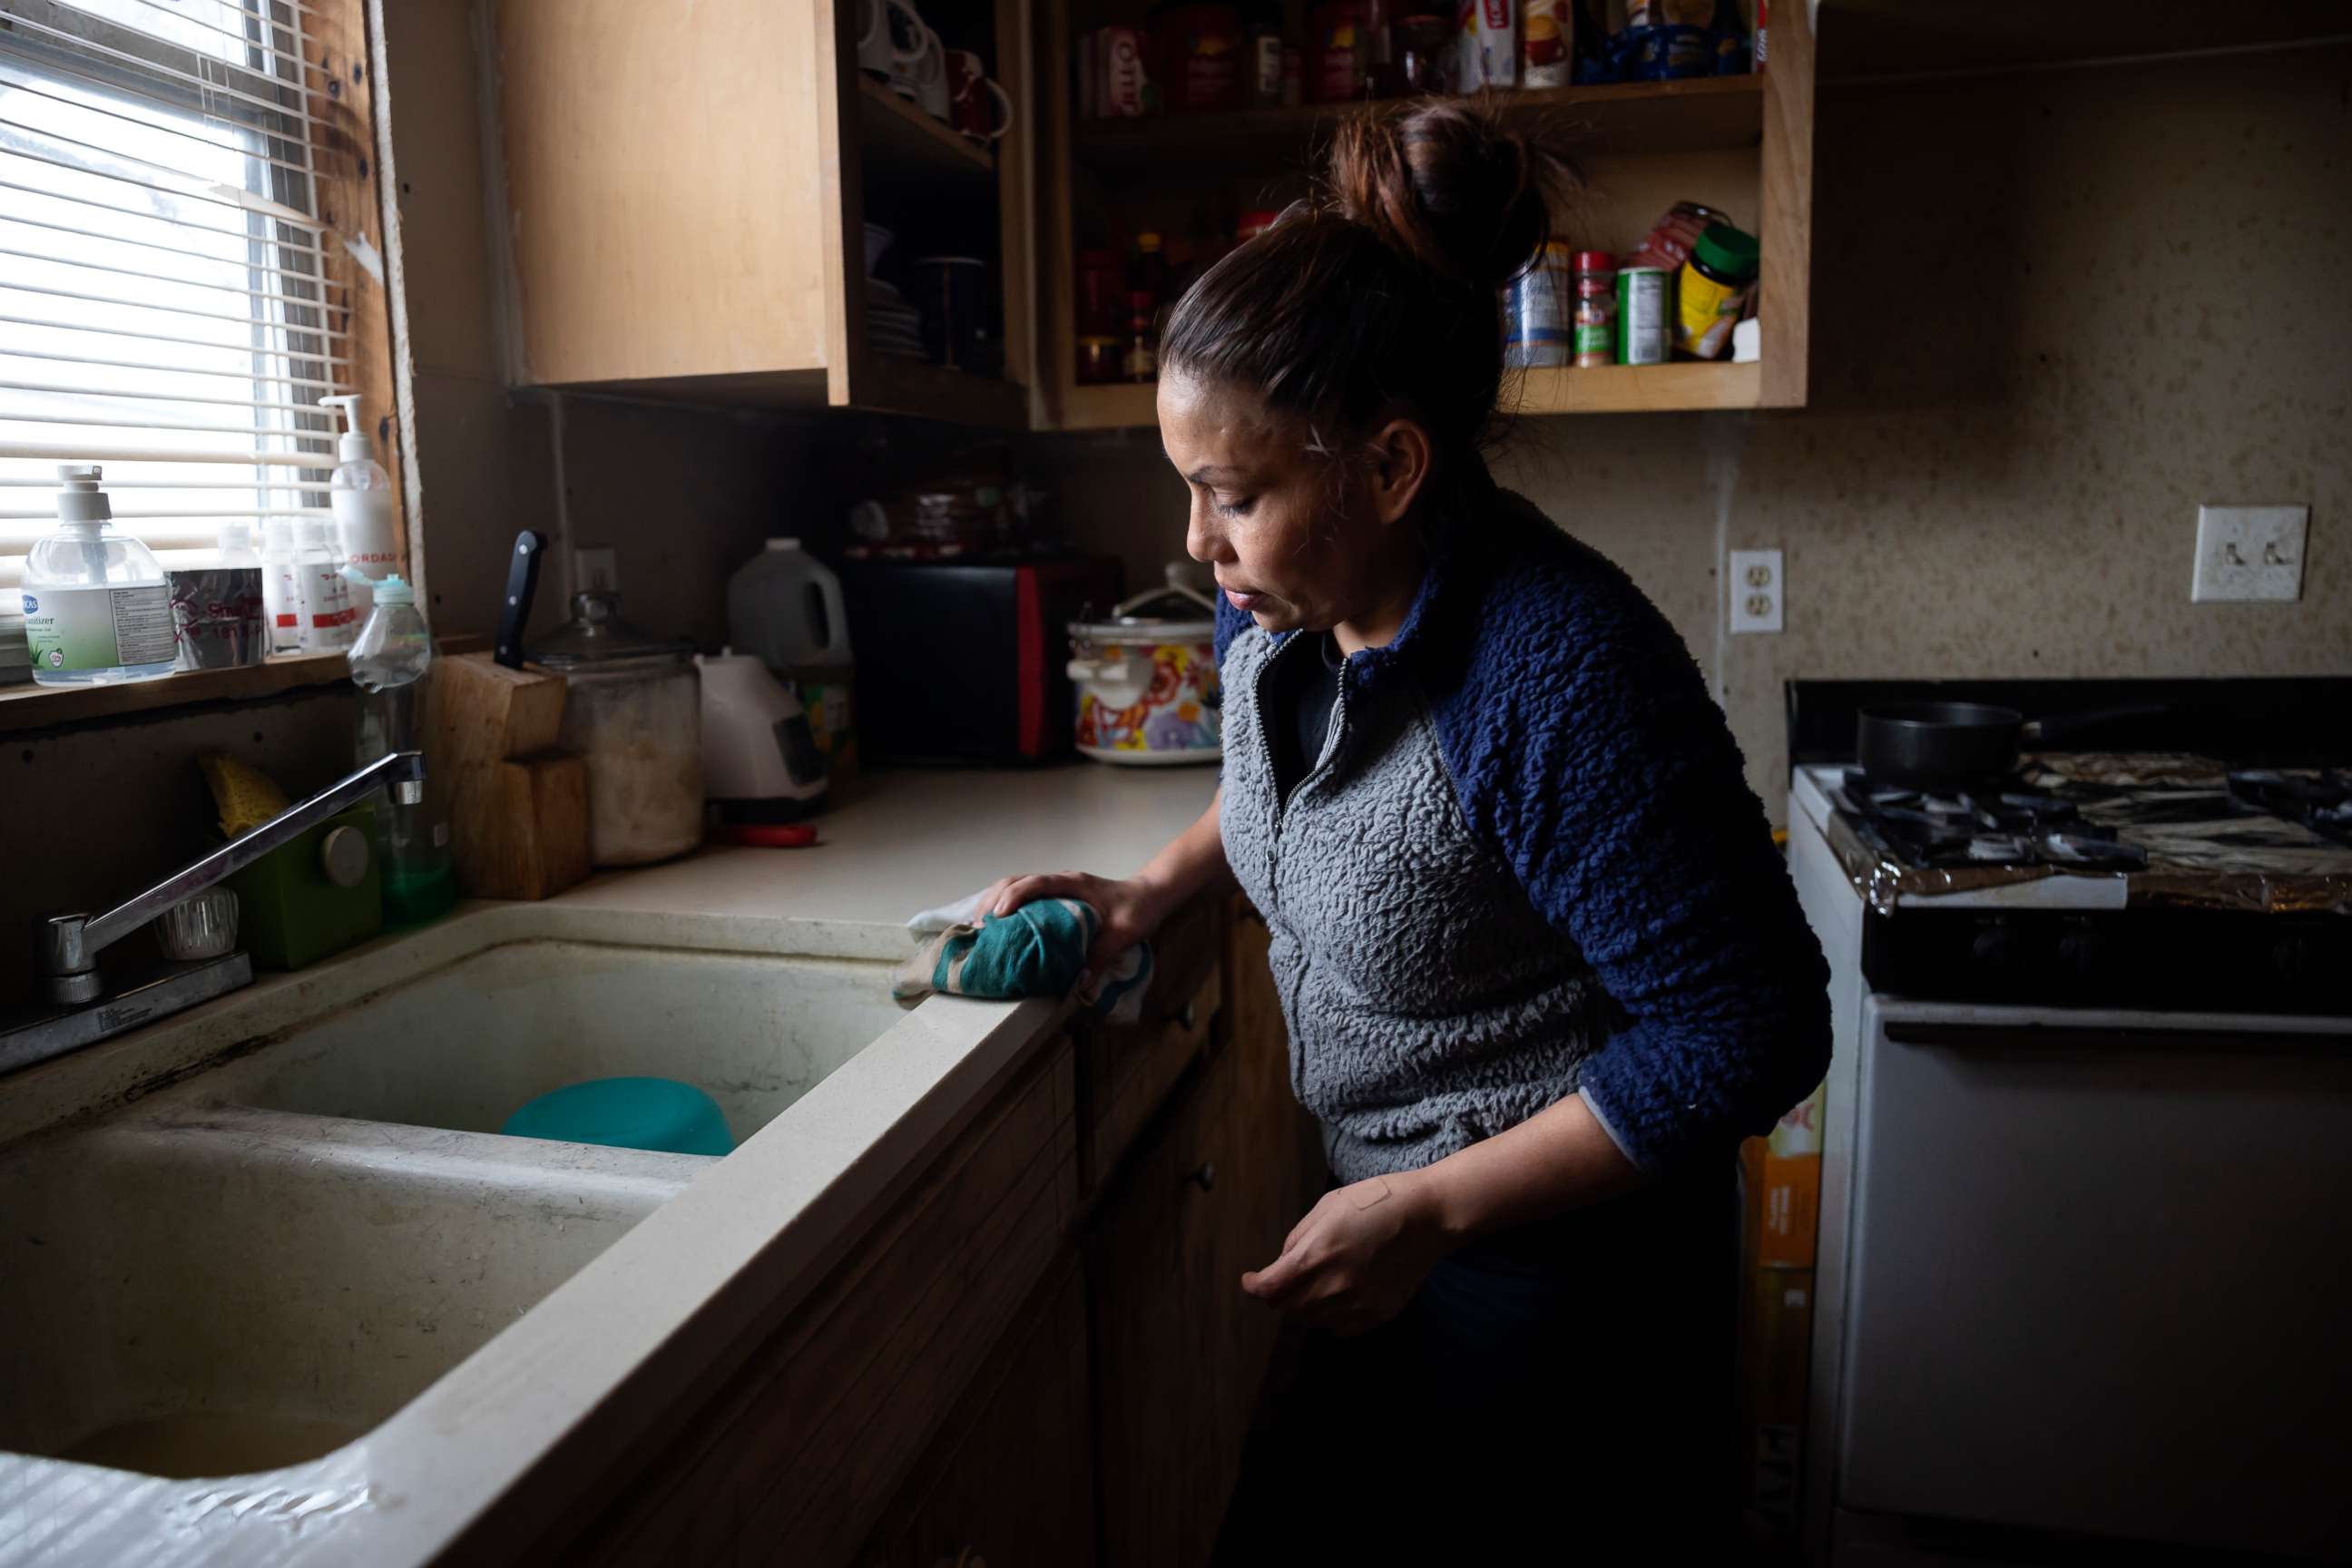 PHOTO: Maria Pineda cleans the kitchen of a home, where she temporarily stays, Feb. 18, 2021, in Conroe, Texas.